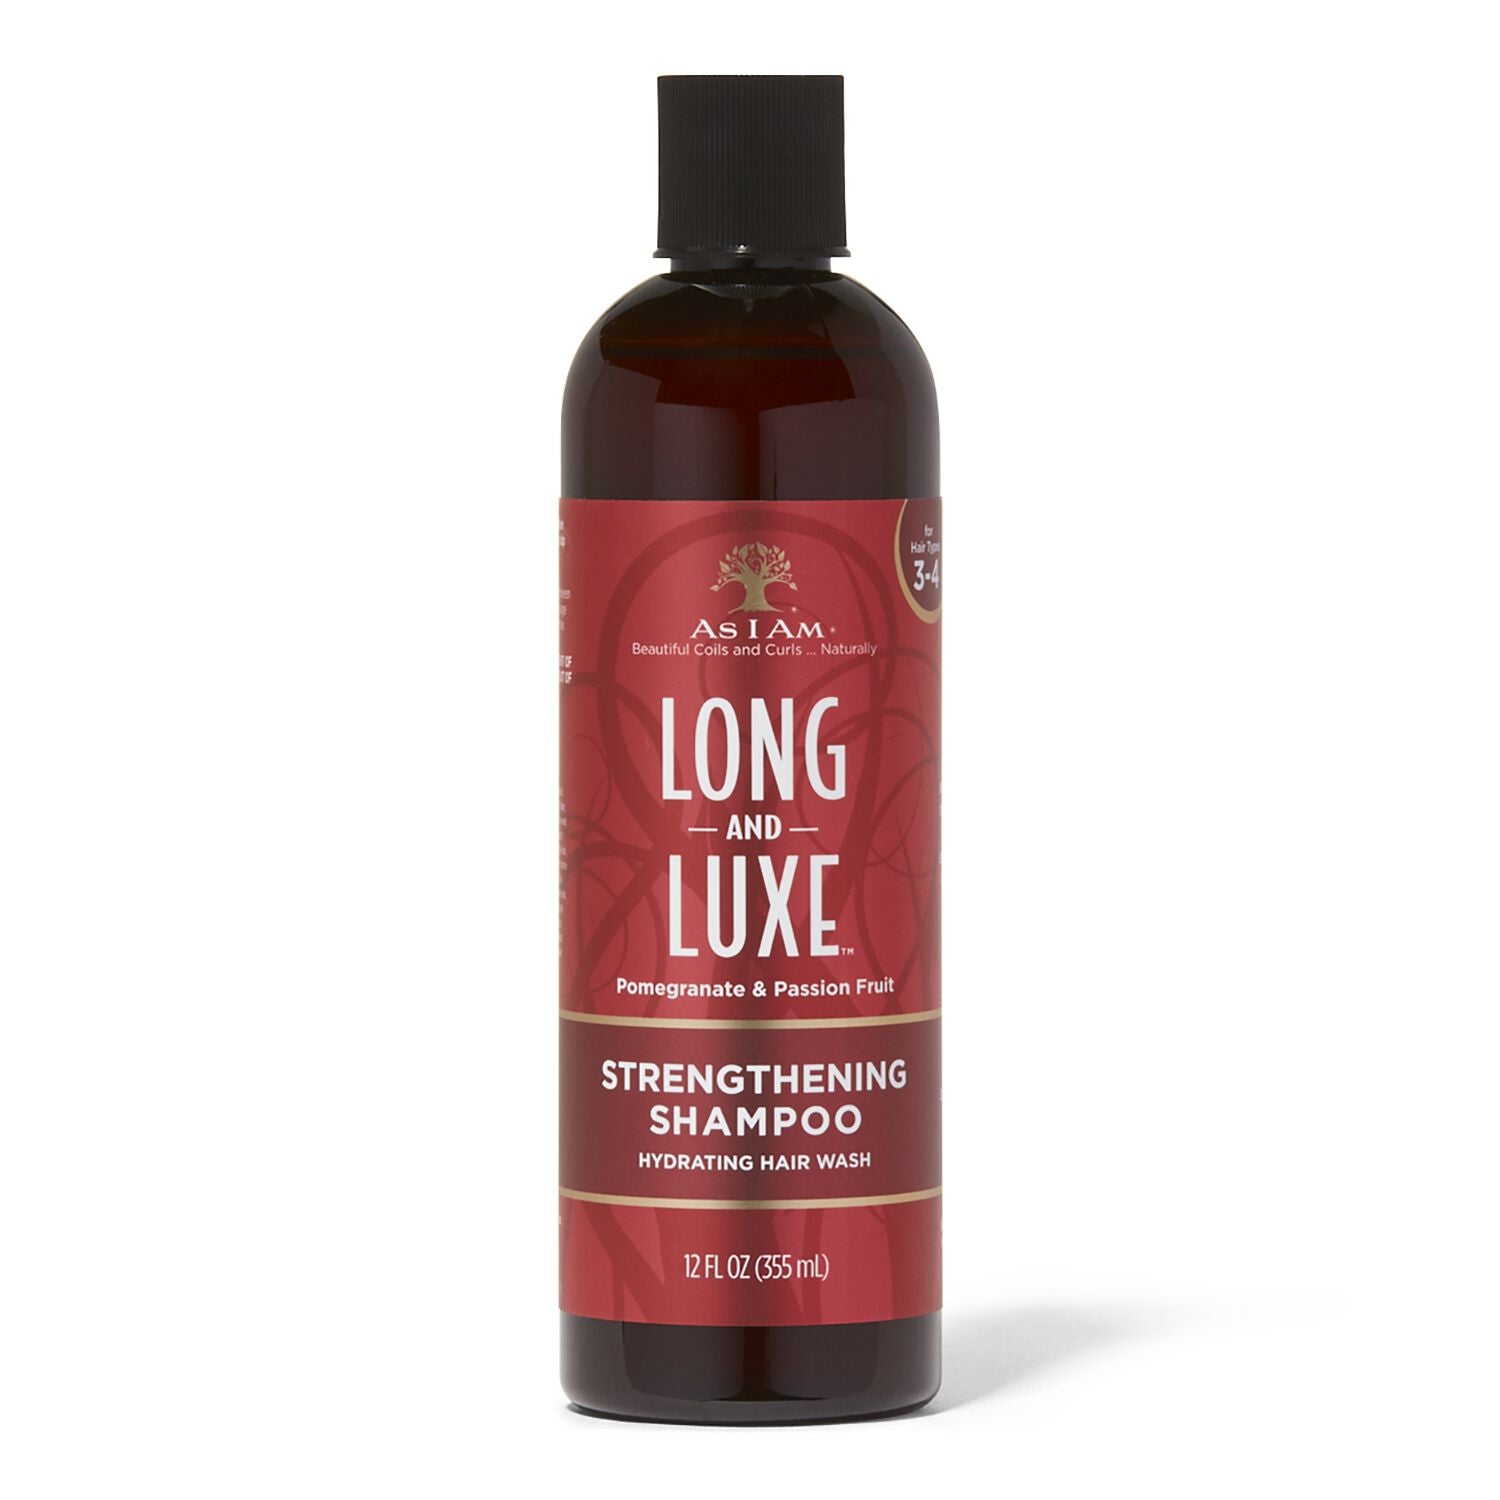 AS I AM LONG AND LUXE STRENGTHENING SHAMPOO 12OZ